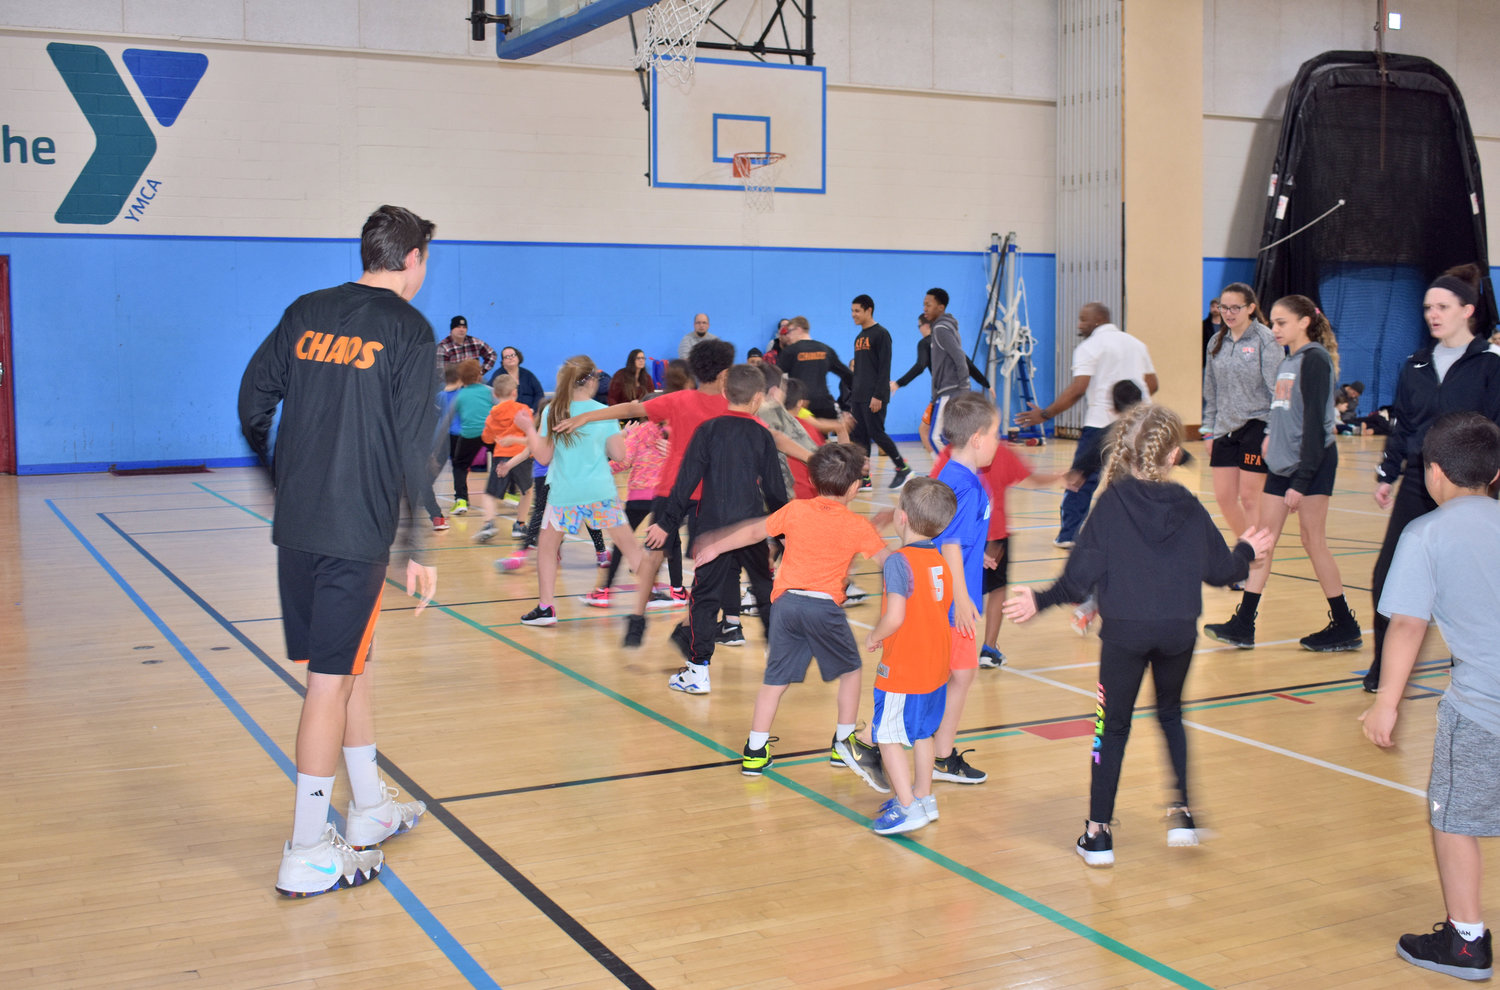 SHOOTING HOOPS  —  Members of the Rome Free Academy boys and girls  varsity basketball teams help instruct youth in grades kindergarten through second during a learn to play basketball clinic session in this file photo.